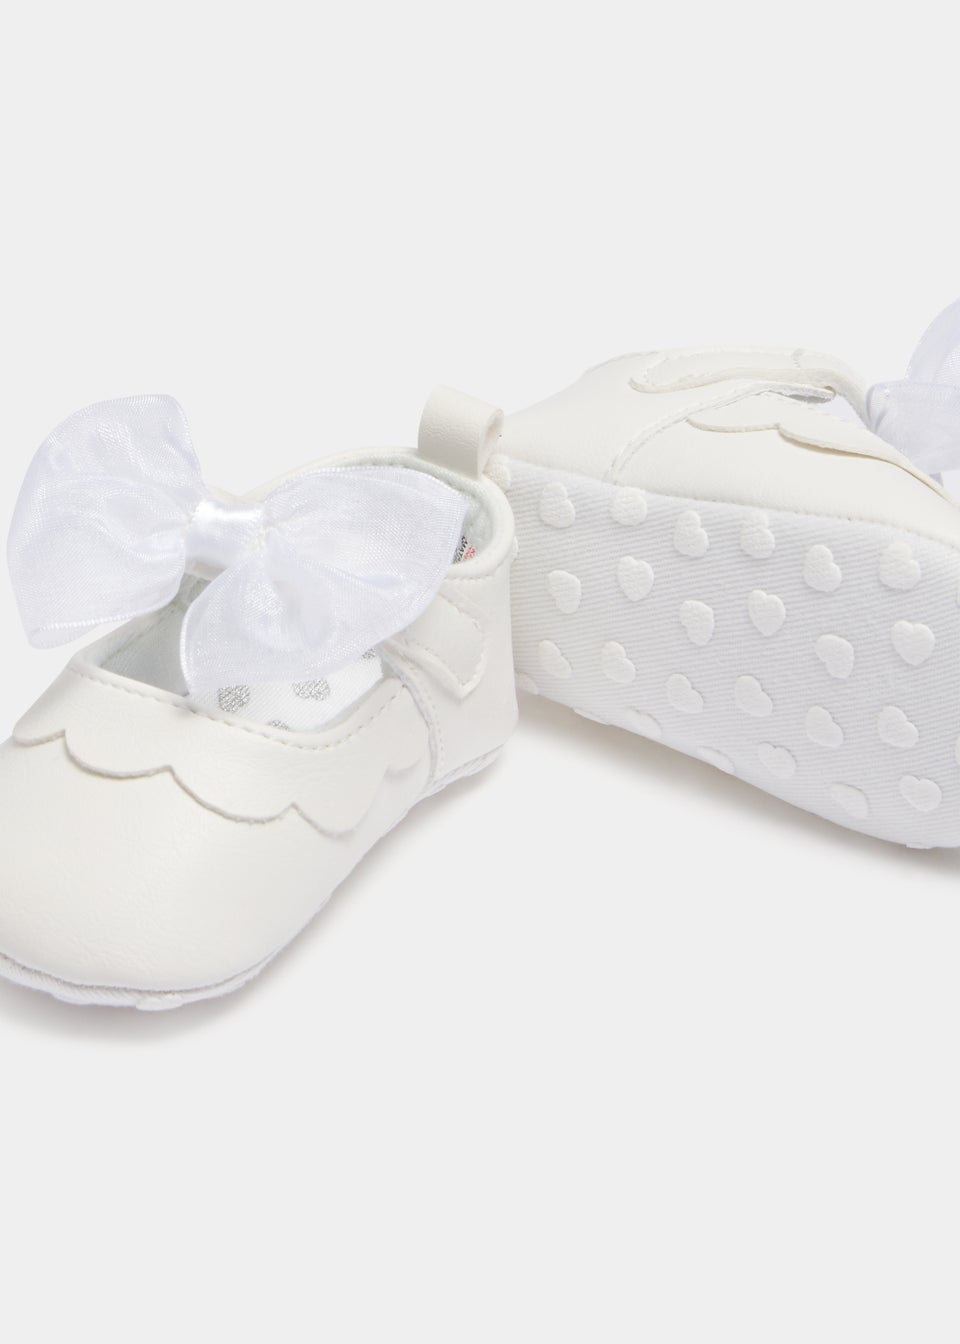 White Bow Soft Sole Baby Ballet Shoes (Newborn-18mths)